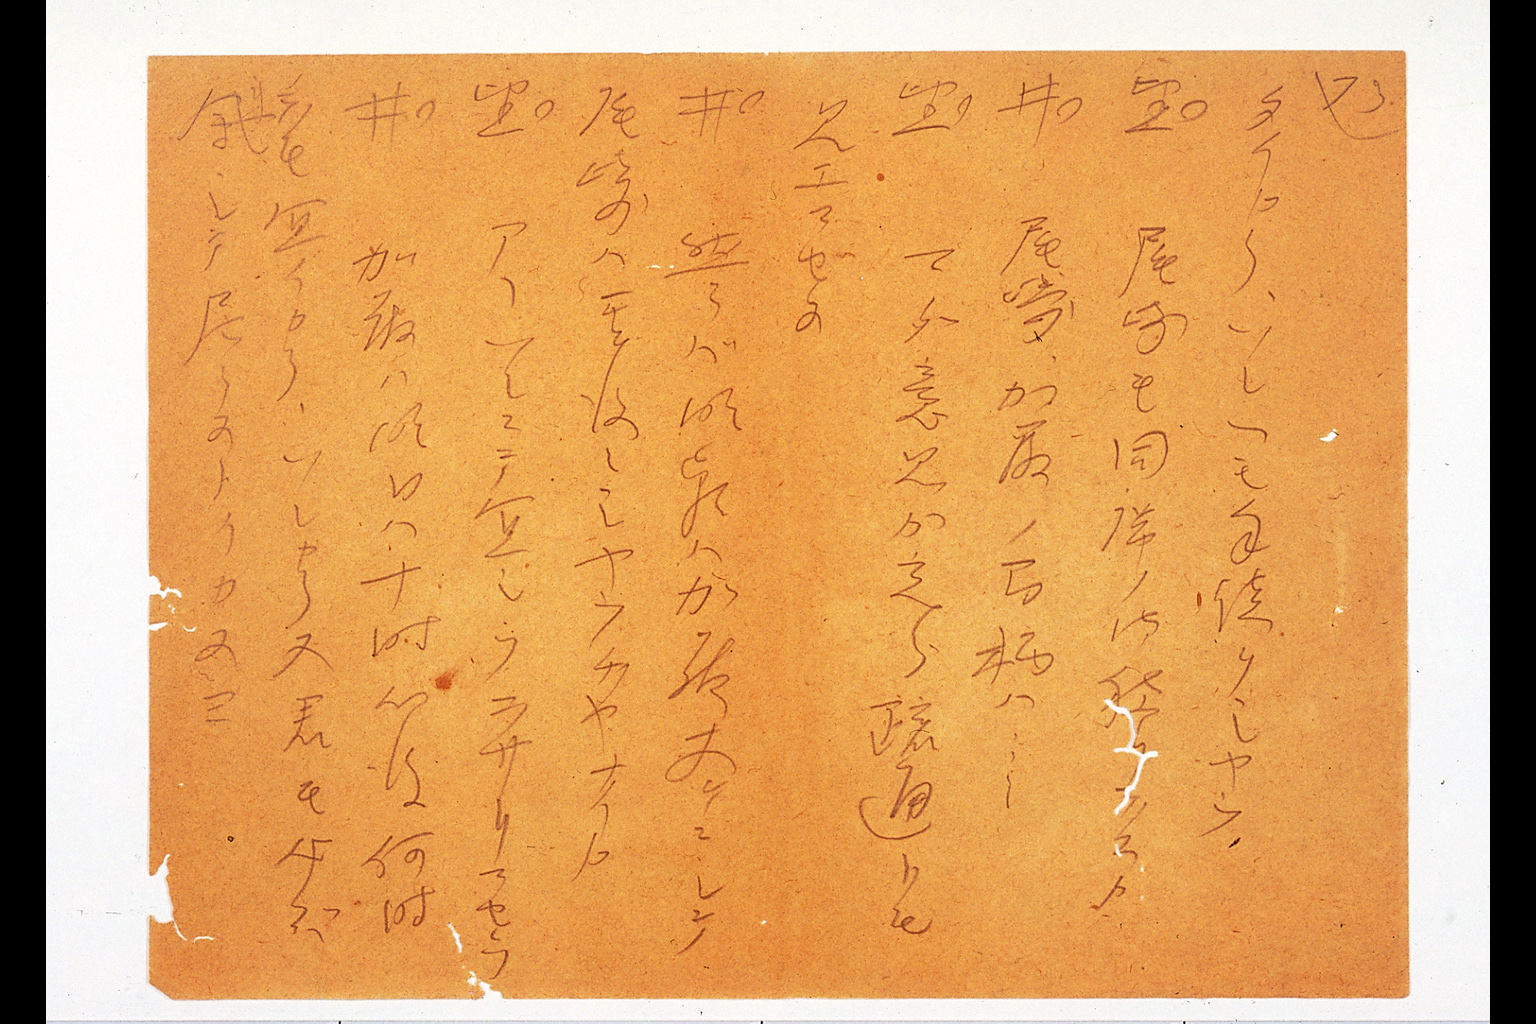 Account Summarizing the Meeting between Marquis INOUE and Count OKUMA(larger)